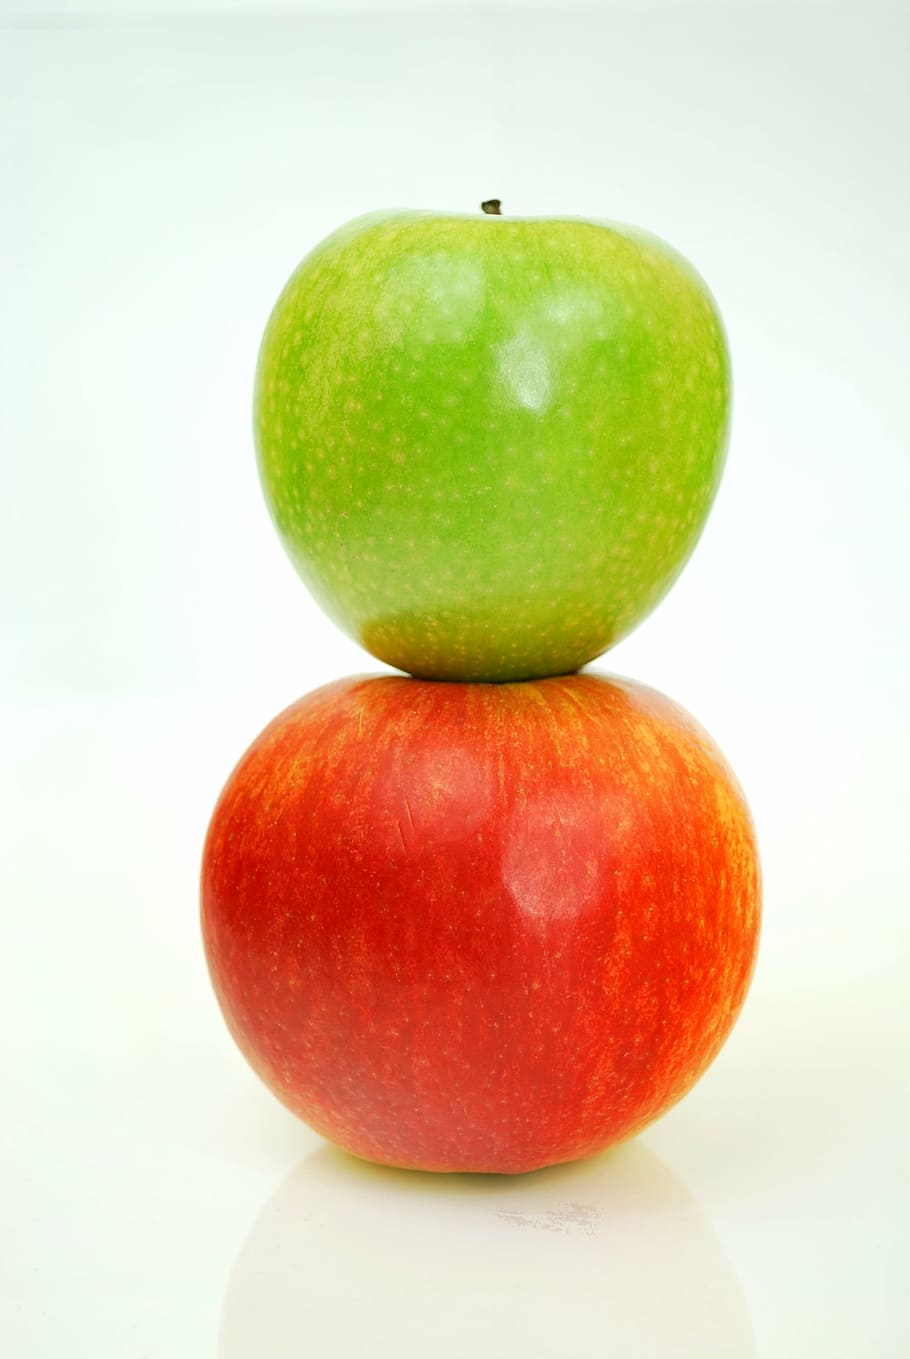 two, green, red, apple fruits photo, apples, green apple, fruit, apple - Fruit, food, freshness